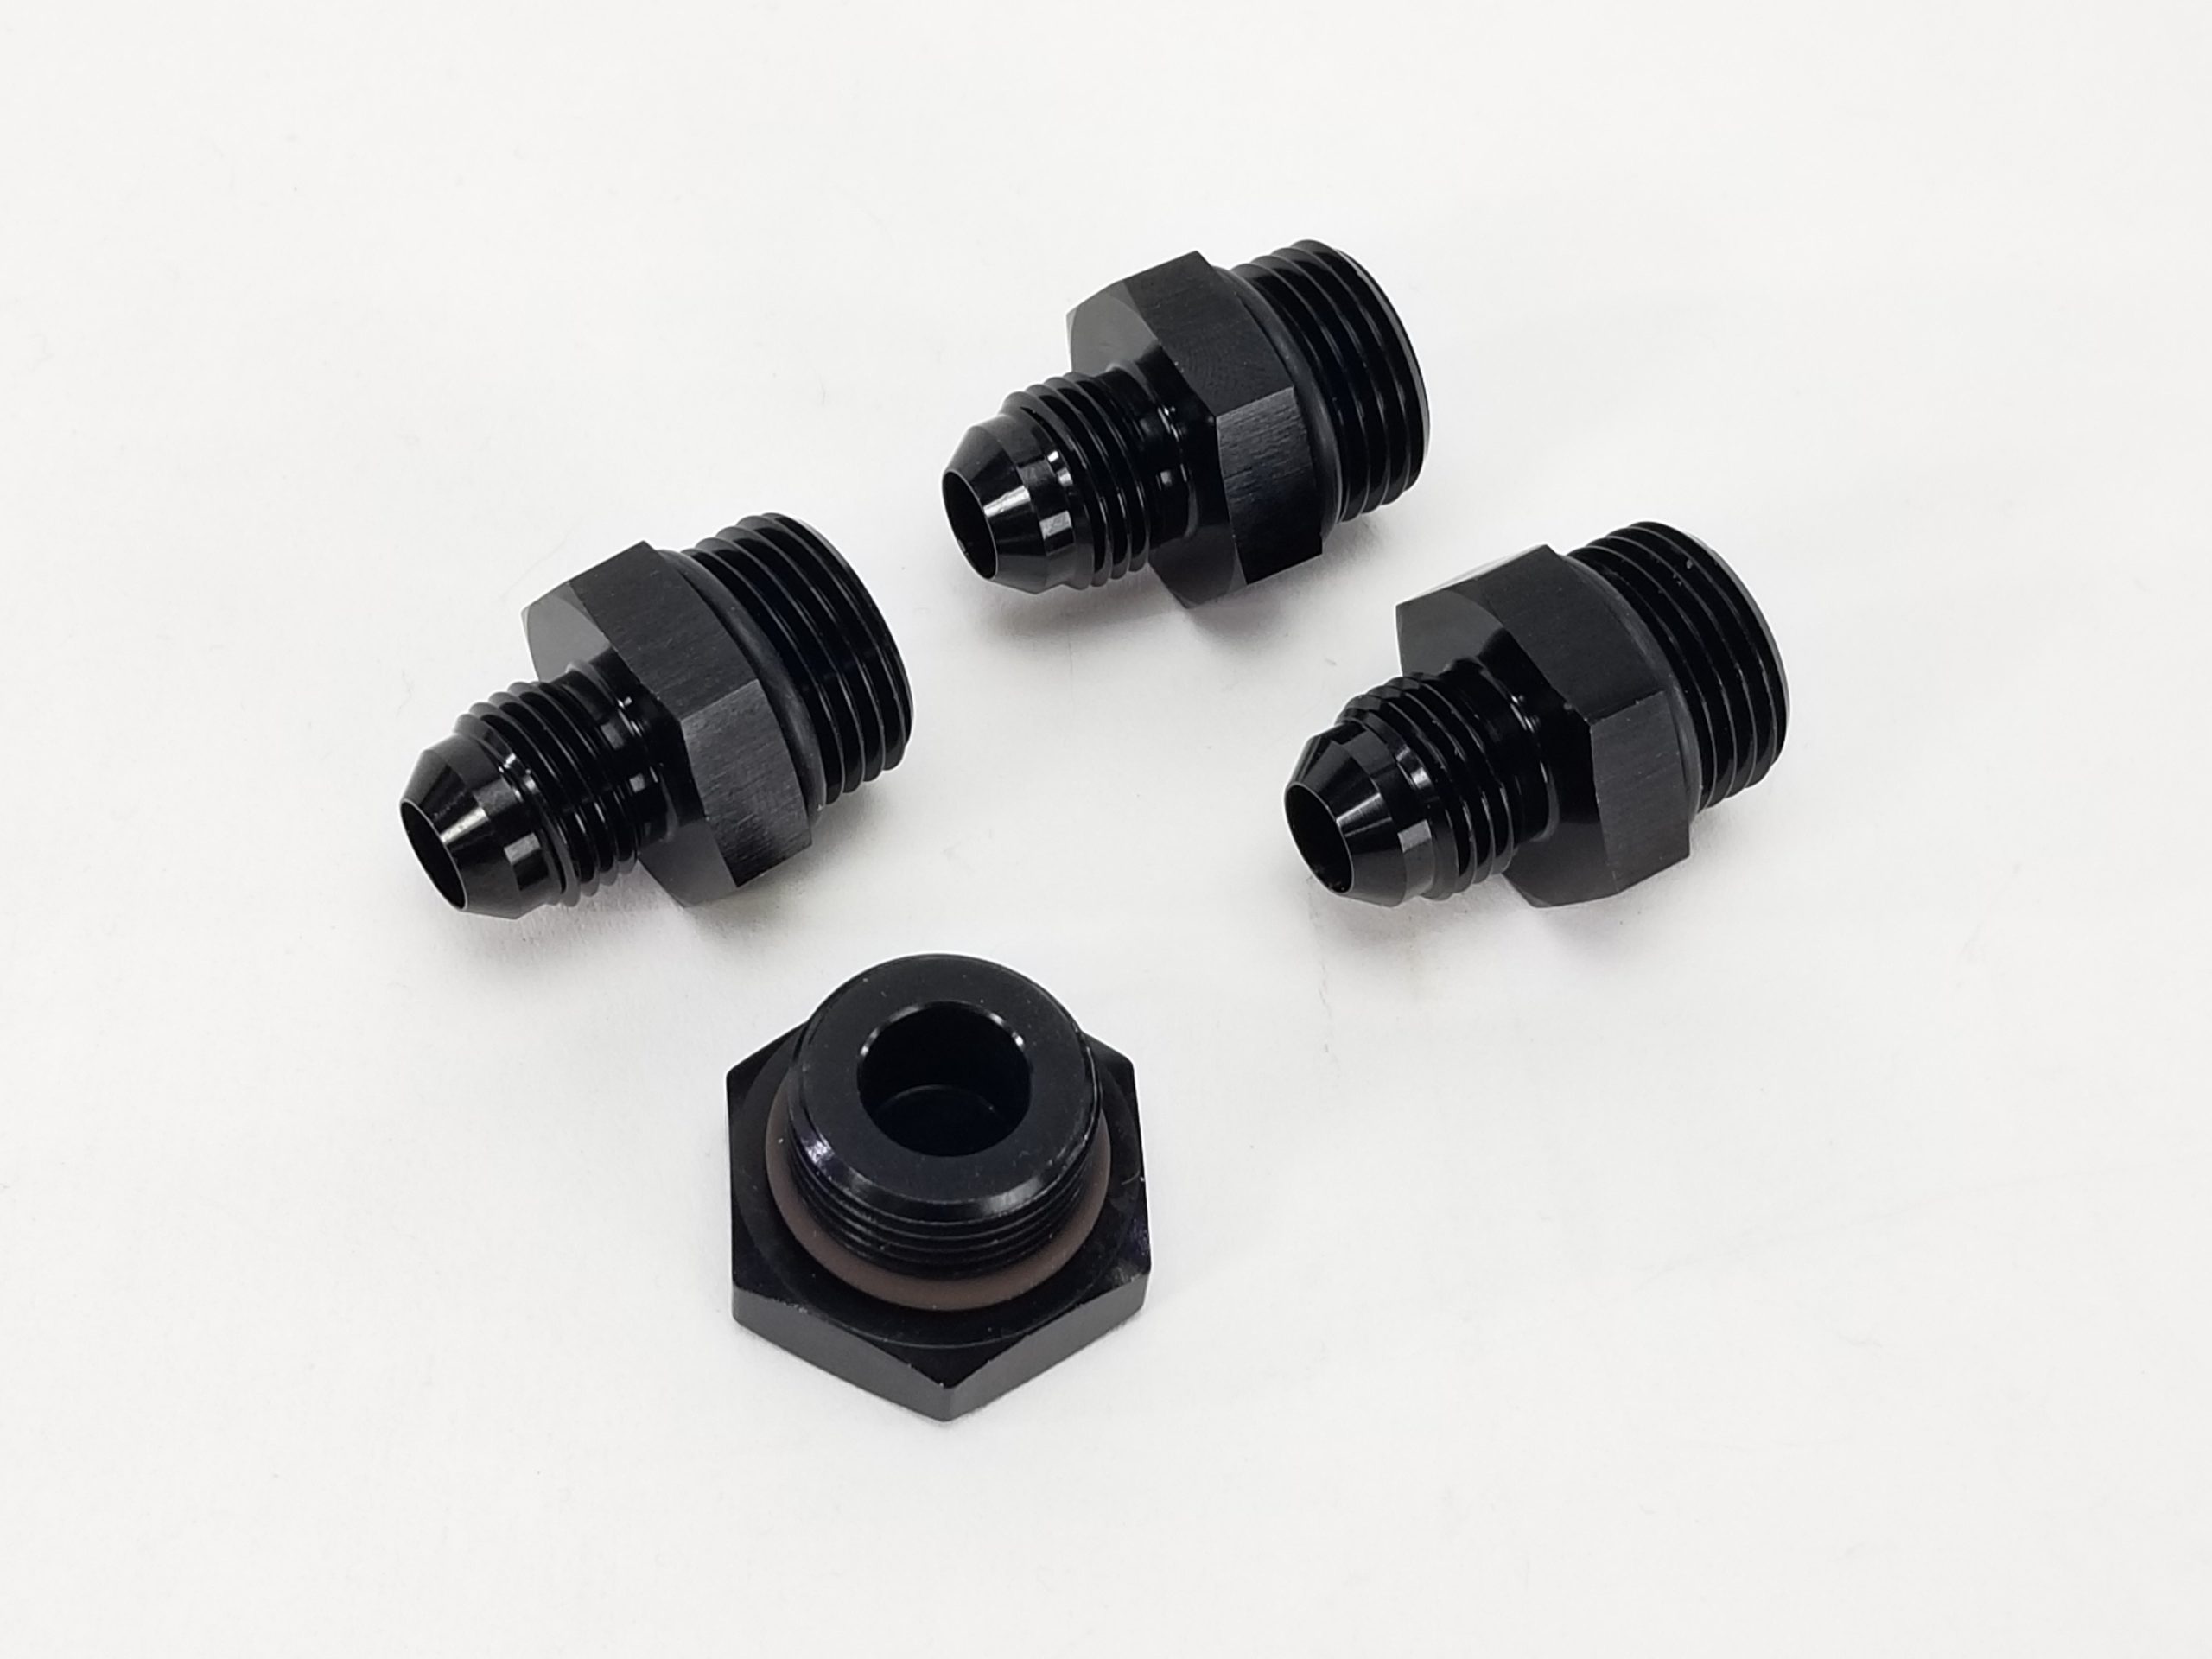 Fuel Rail Fitting Kit 3 -6AN adapters & 1 Plug - For Holley or Other -8ORB  Rails - WARR Performance 47-0038 - WARR Performance LLC